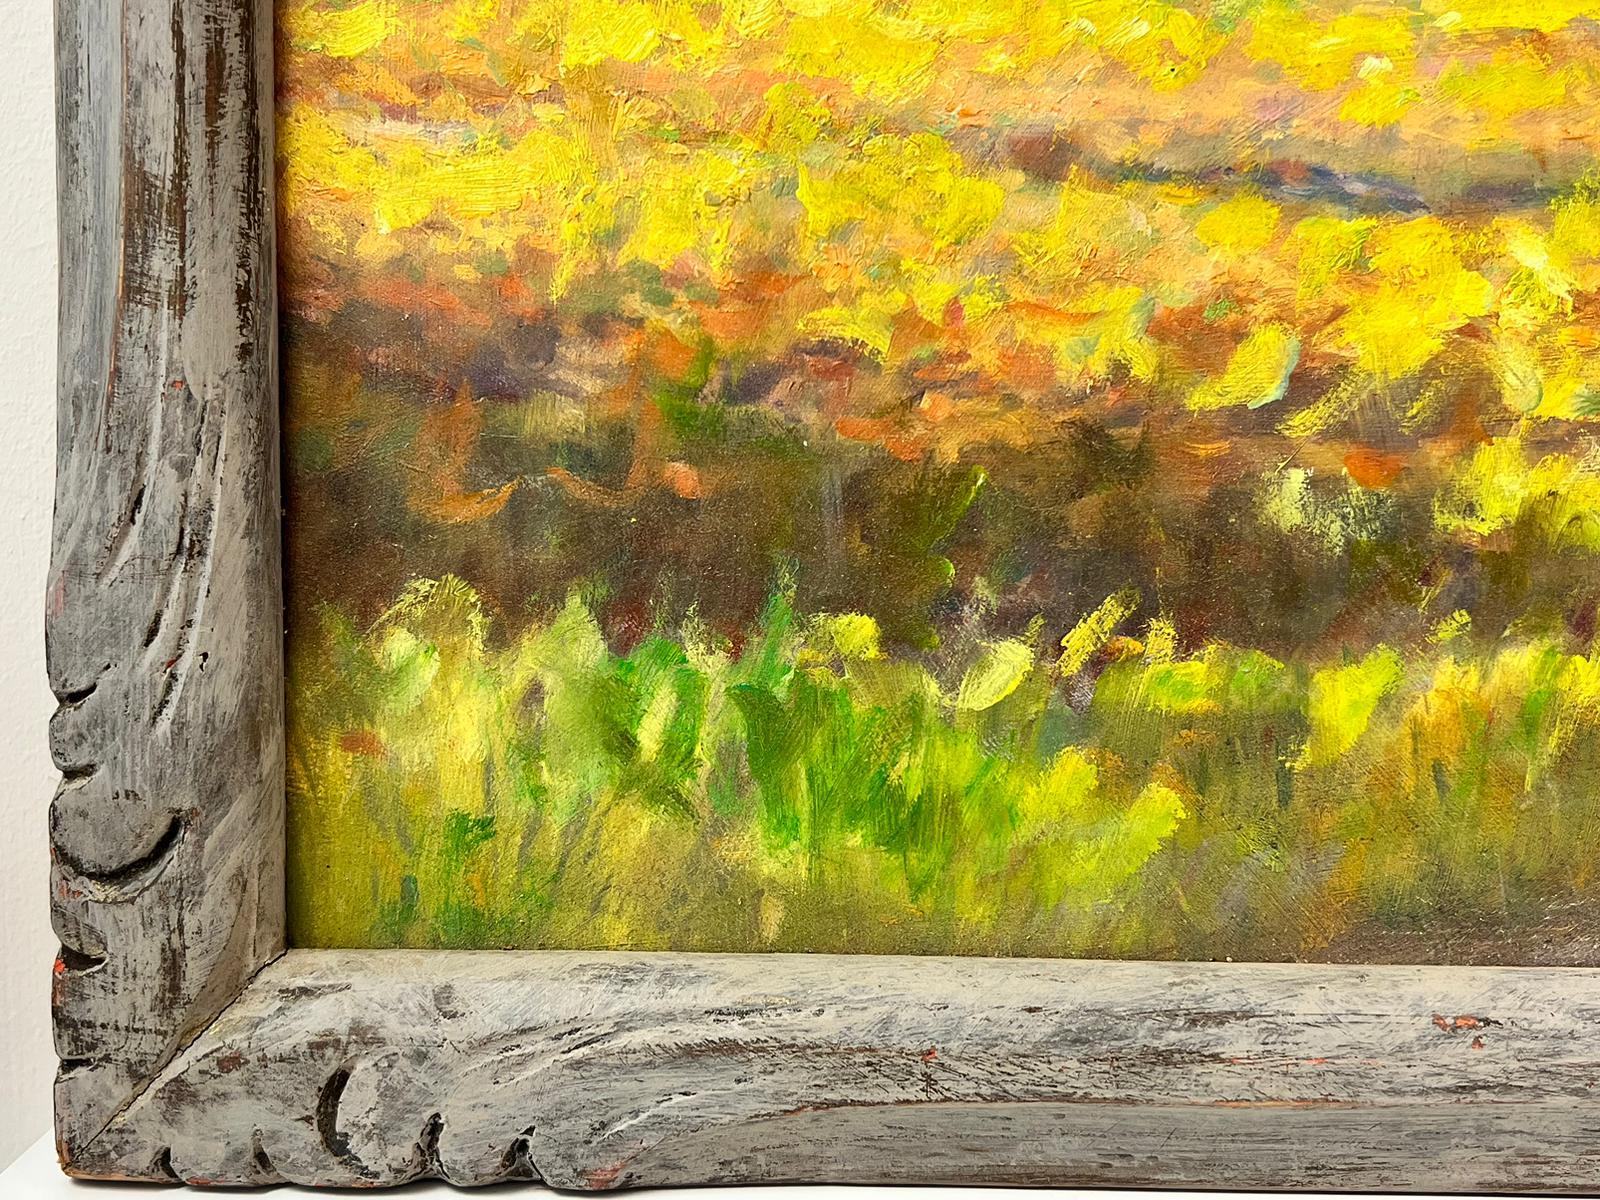 Artist/ School: French Post-Impressionist artist, signed, 20th century

Title: Golden Fields in Auvers-sur-Oise (the town famous for its connection with Vincent van Gogh)

Medium:  oil painting on board, framed

Size: 
framed: 15 x 20 inches
board: